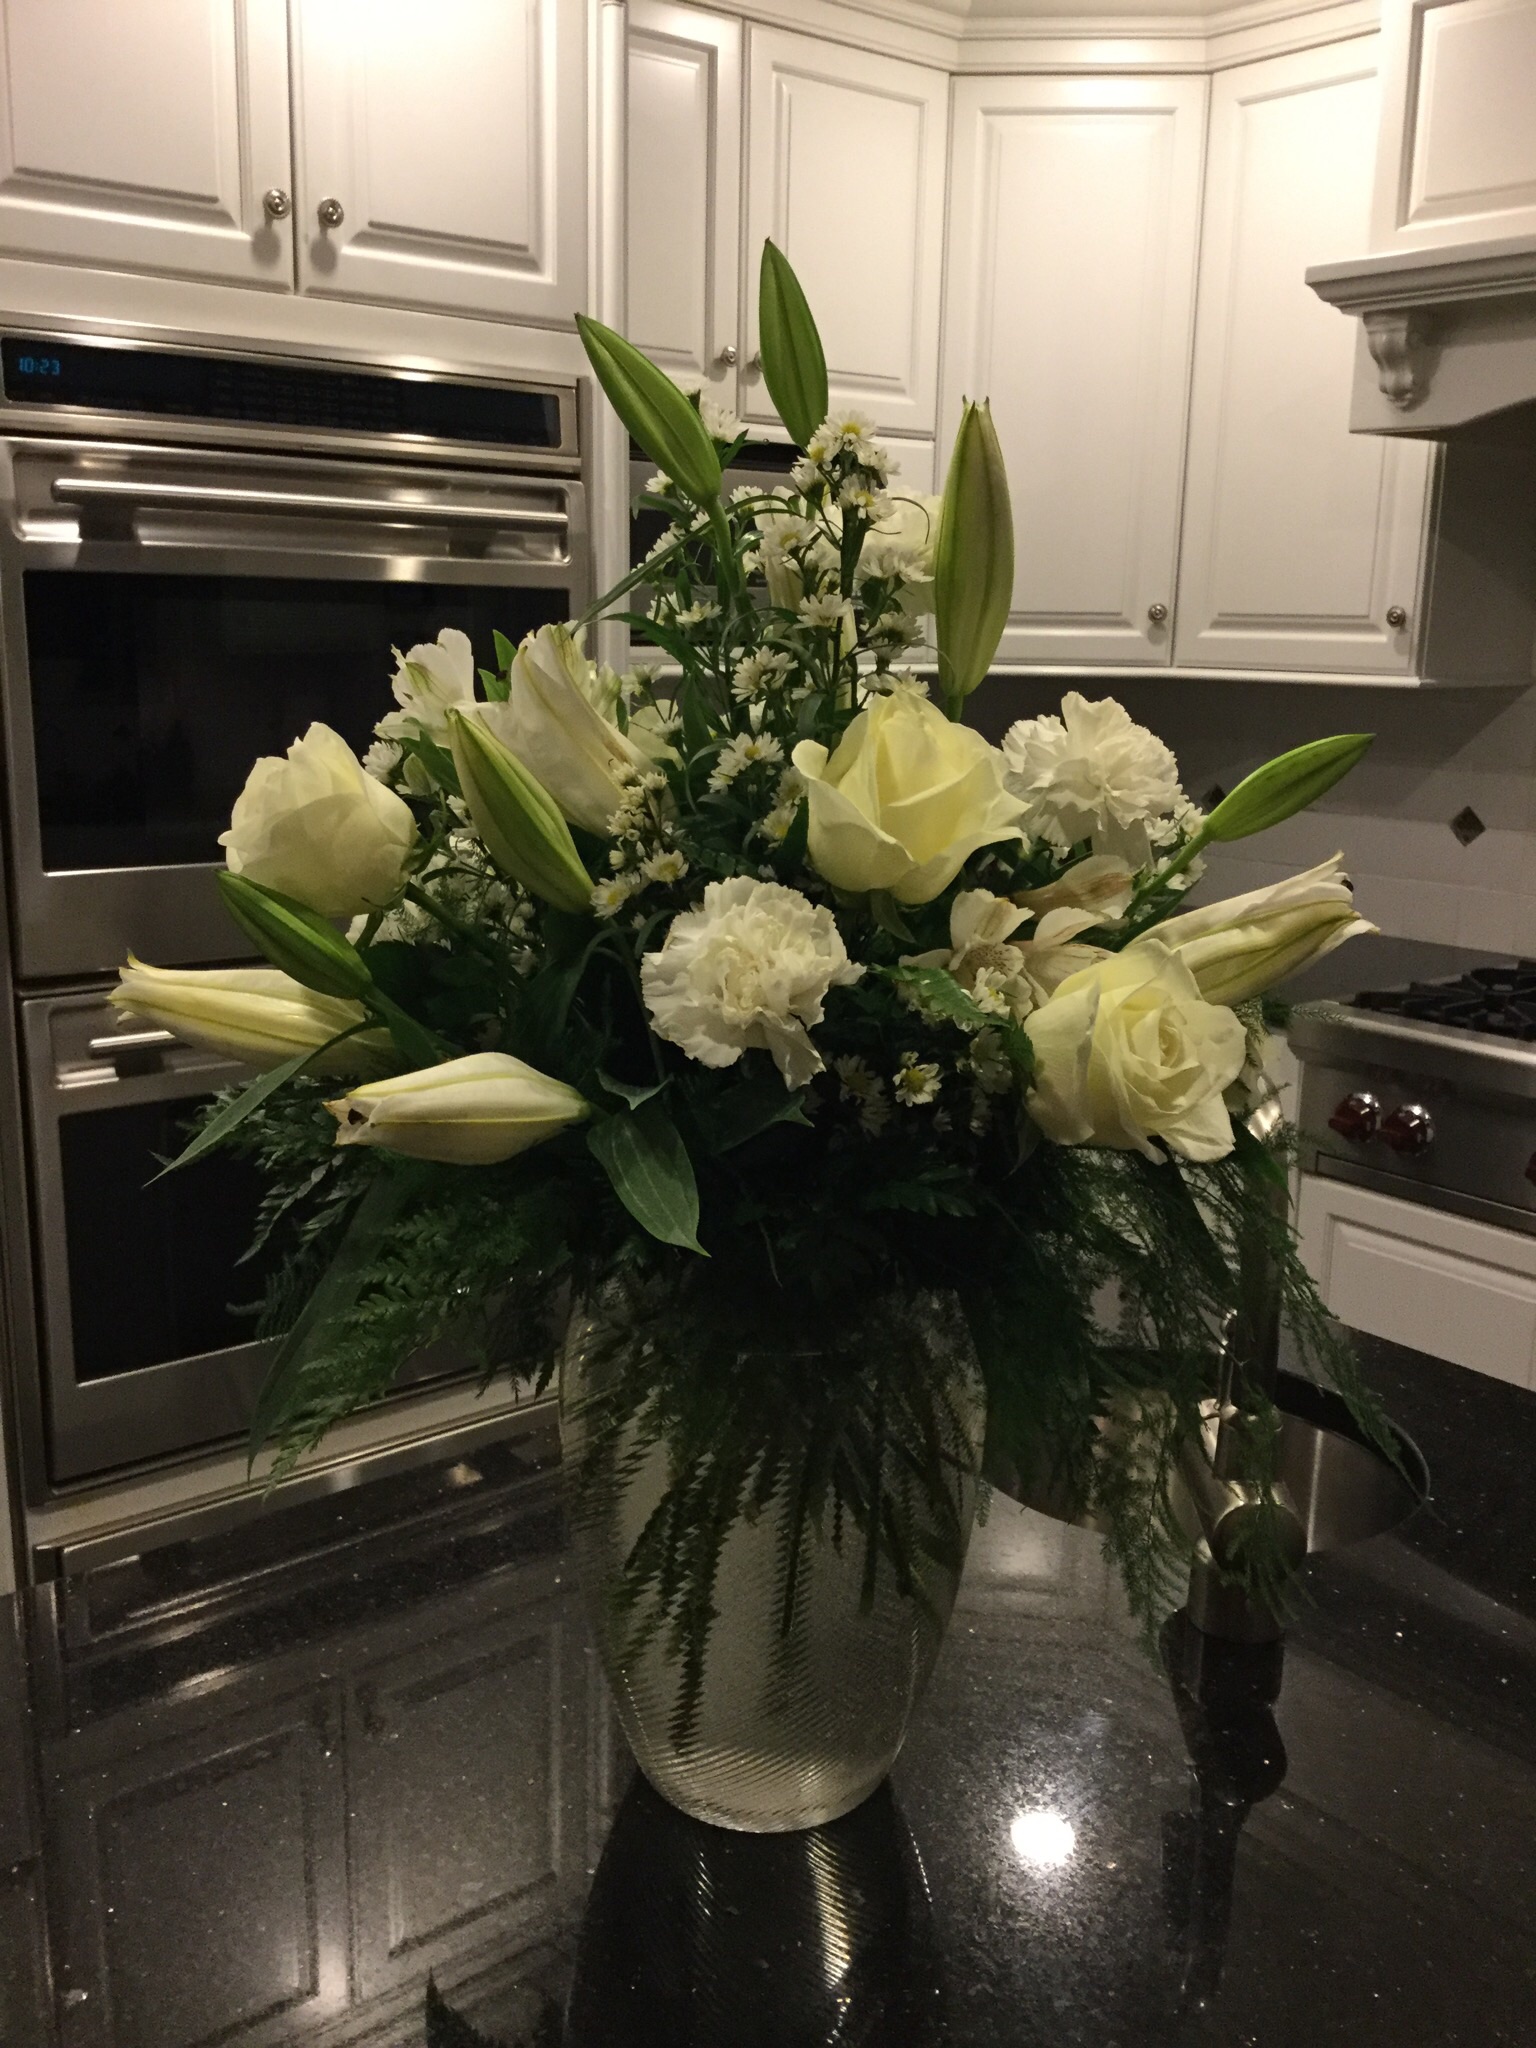 Flowers from our younger son's fiancé's parents